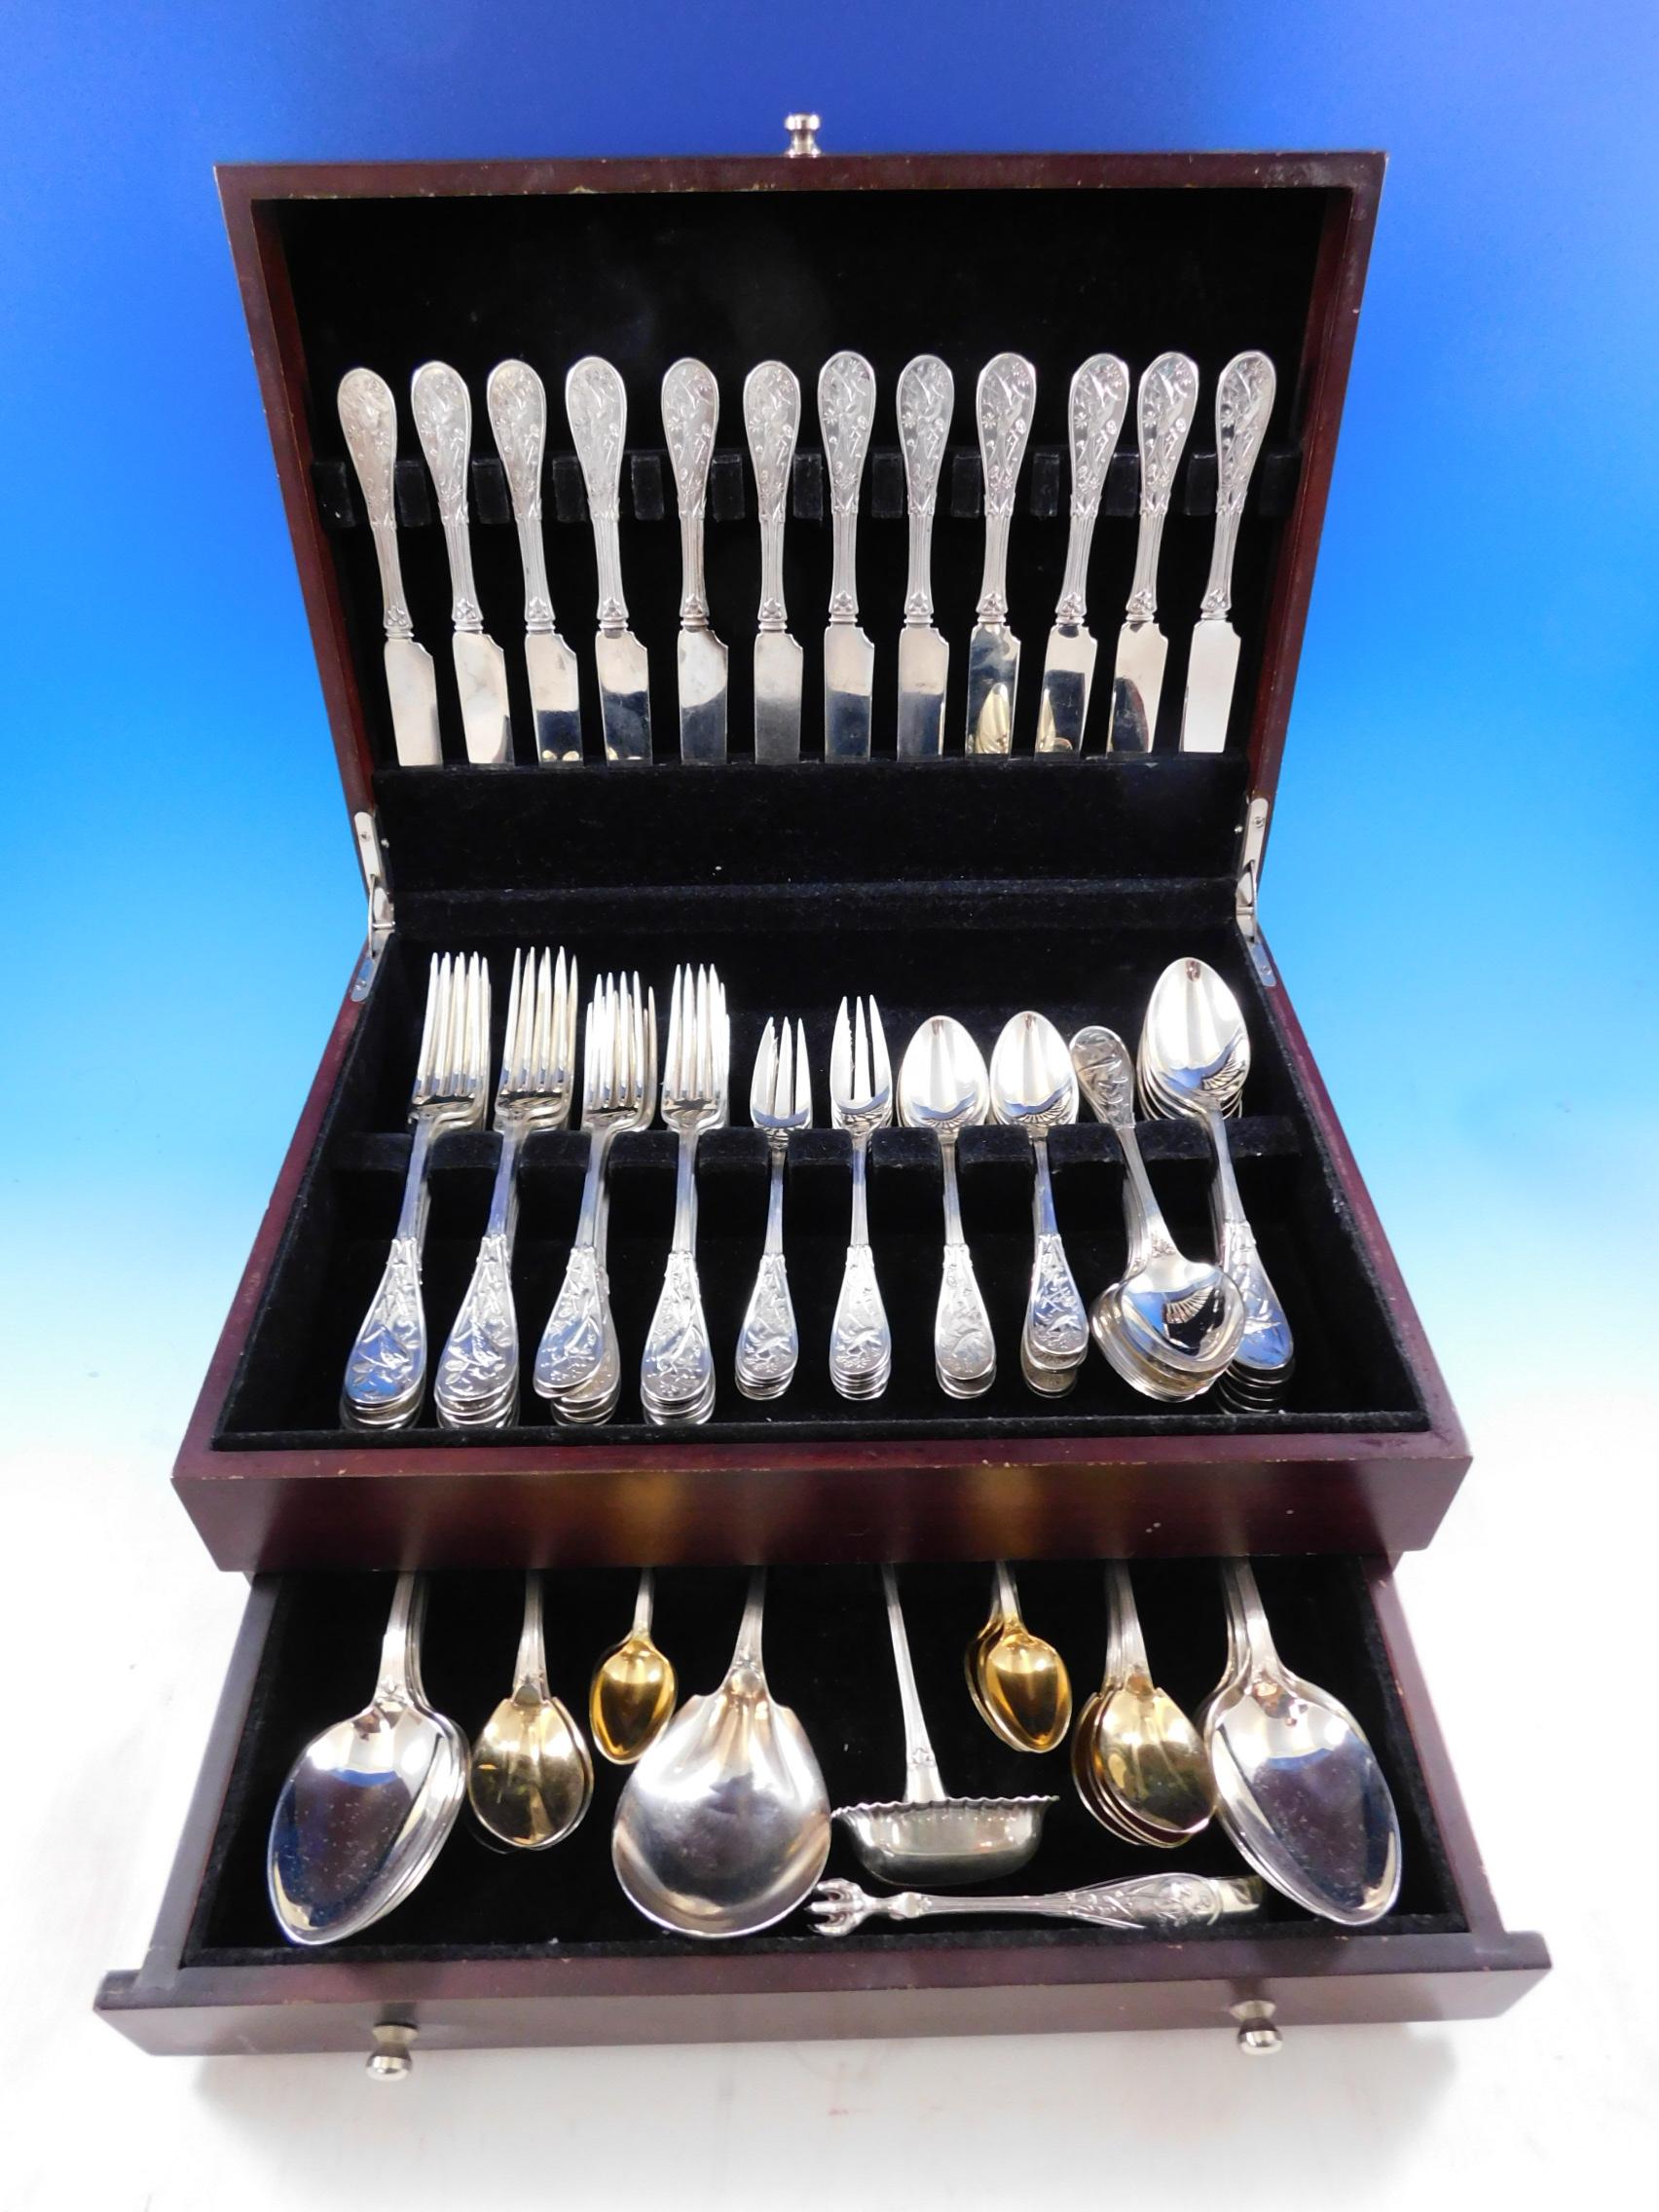 Exceptional monumental antique late-19th century multi-motif Japanese by Tiffany & Co. sterling silver dinner flatware set, 111 pieces. This set includes: 

12 knives, flat handle all-sterling, 8